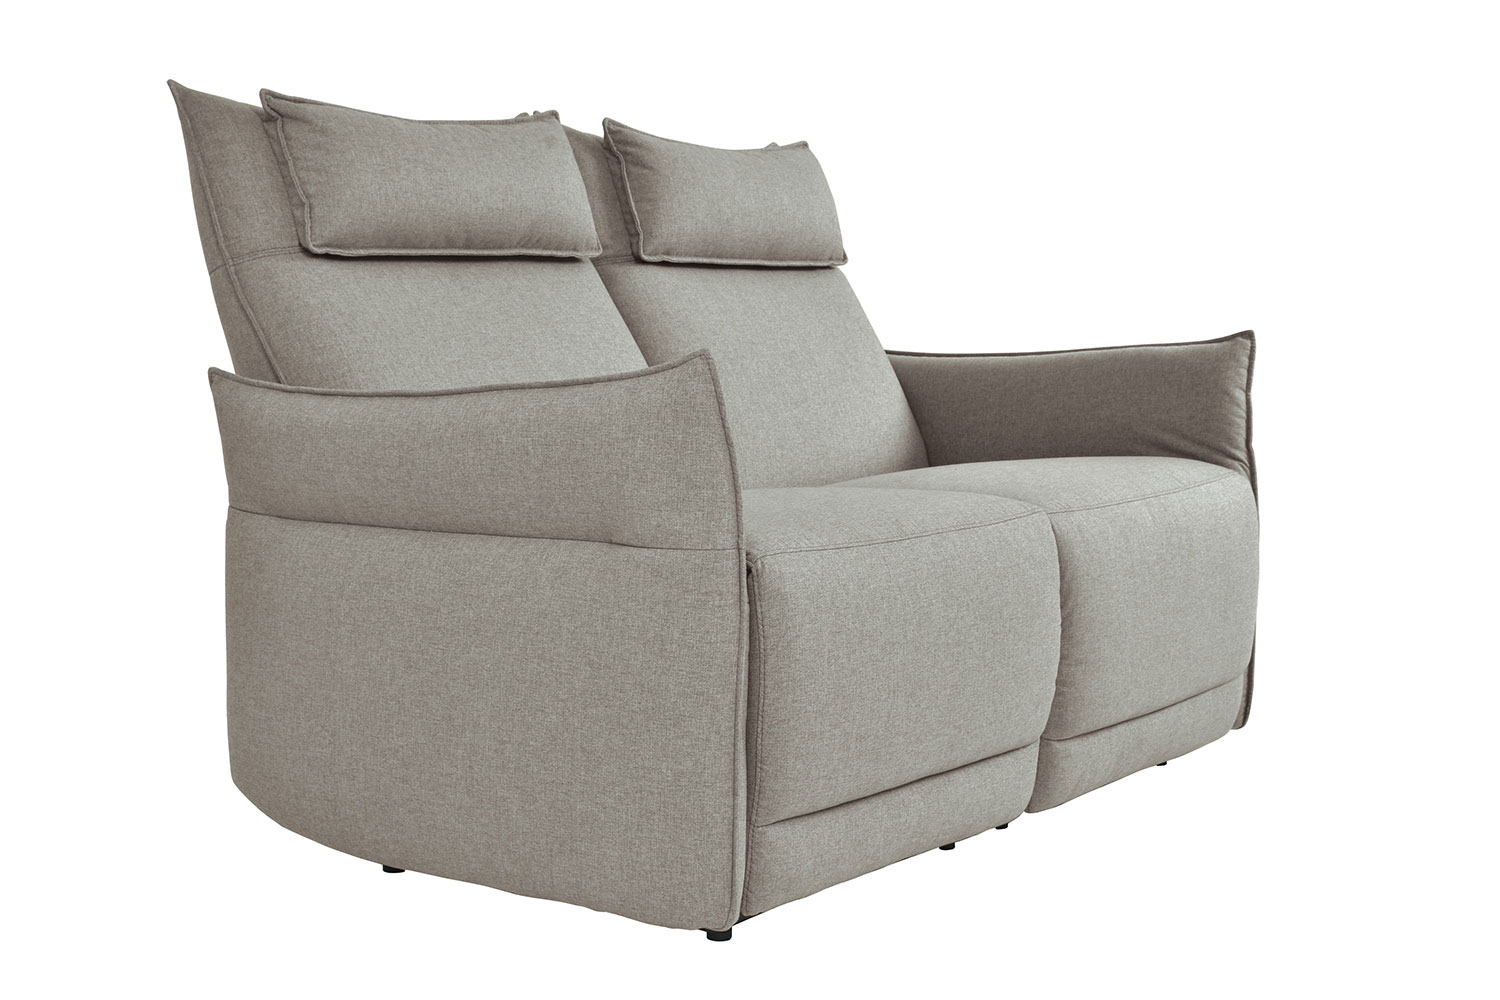 Homelegance Linette Power Double Reclining Love Seat with Power Headrests - Taupe